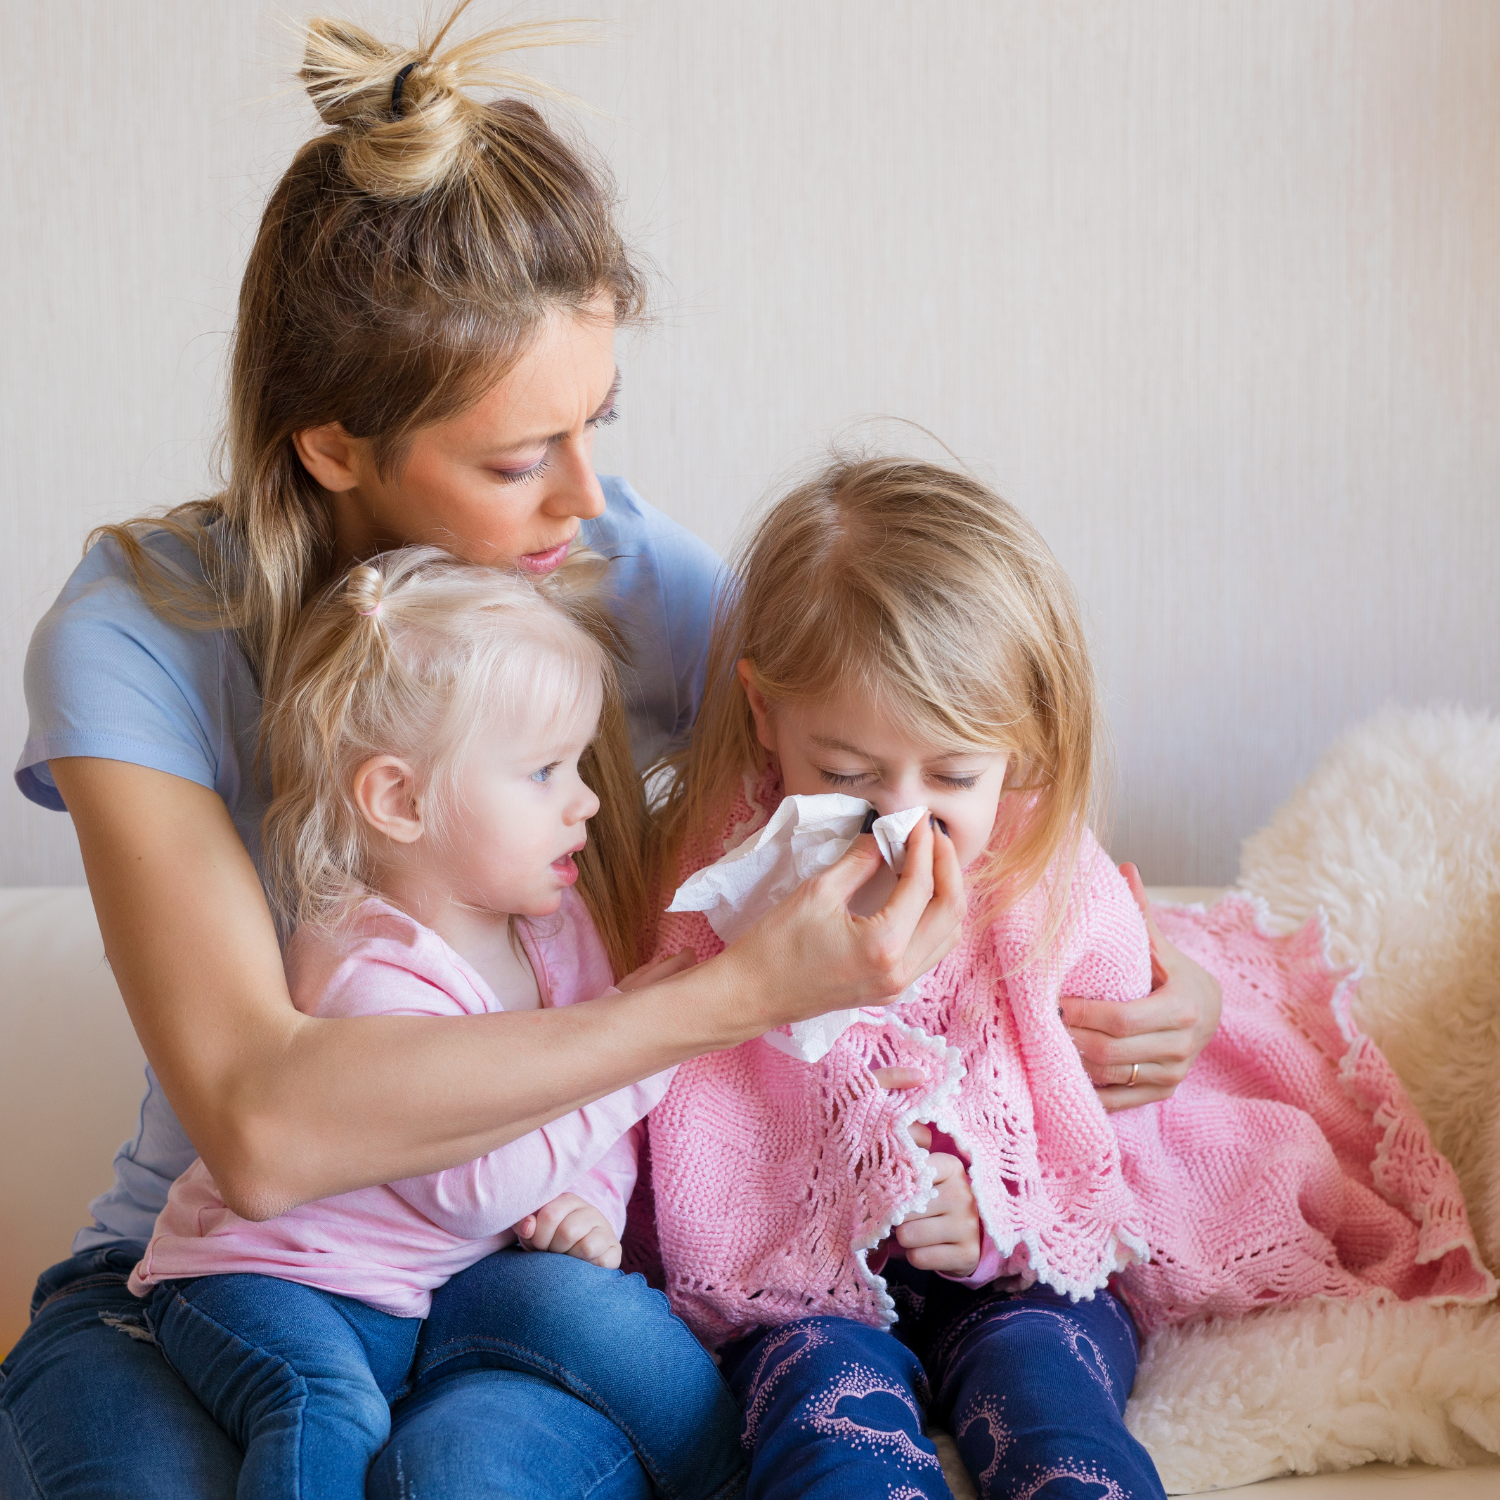 Mum sat wiping the noses of her two children | Family Health - Clair de Lune UK